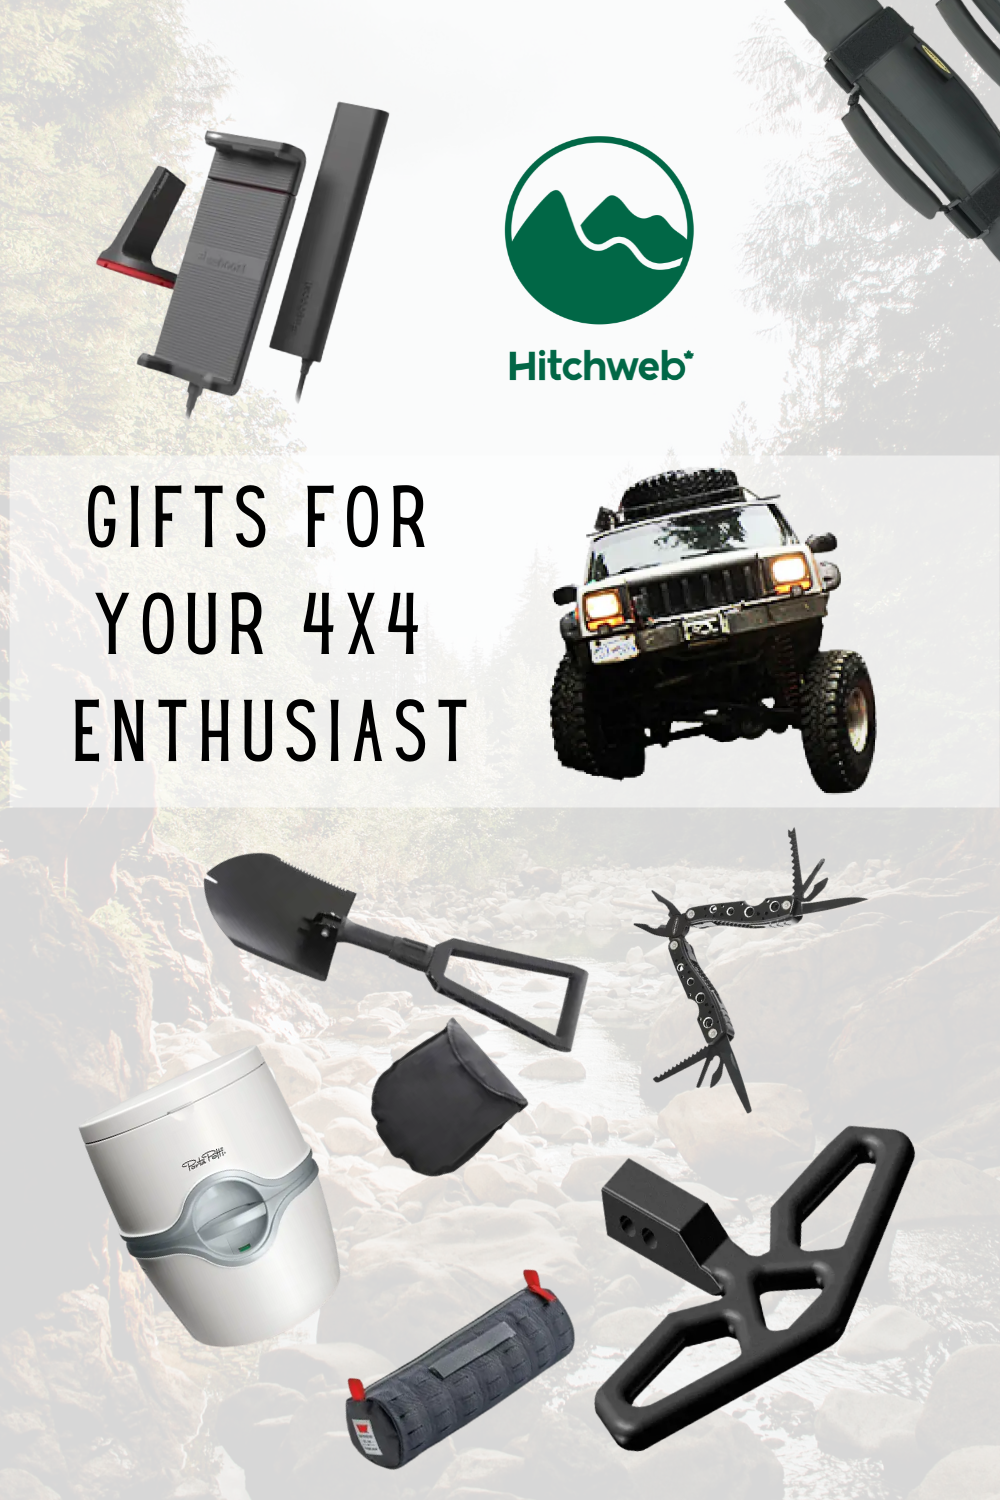 HITCHWEB GIFT GUIDE 4X4 ENTHUSIAST